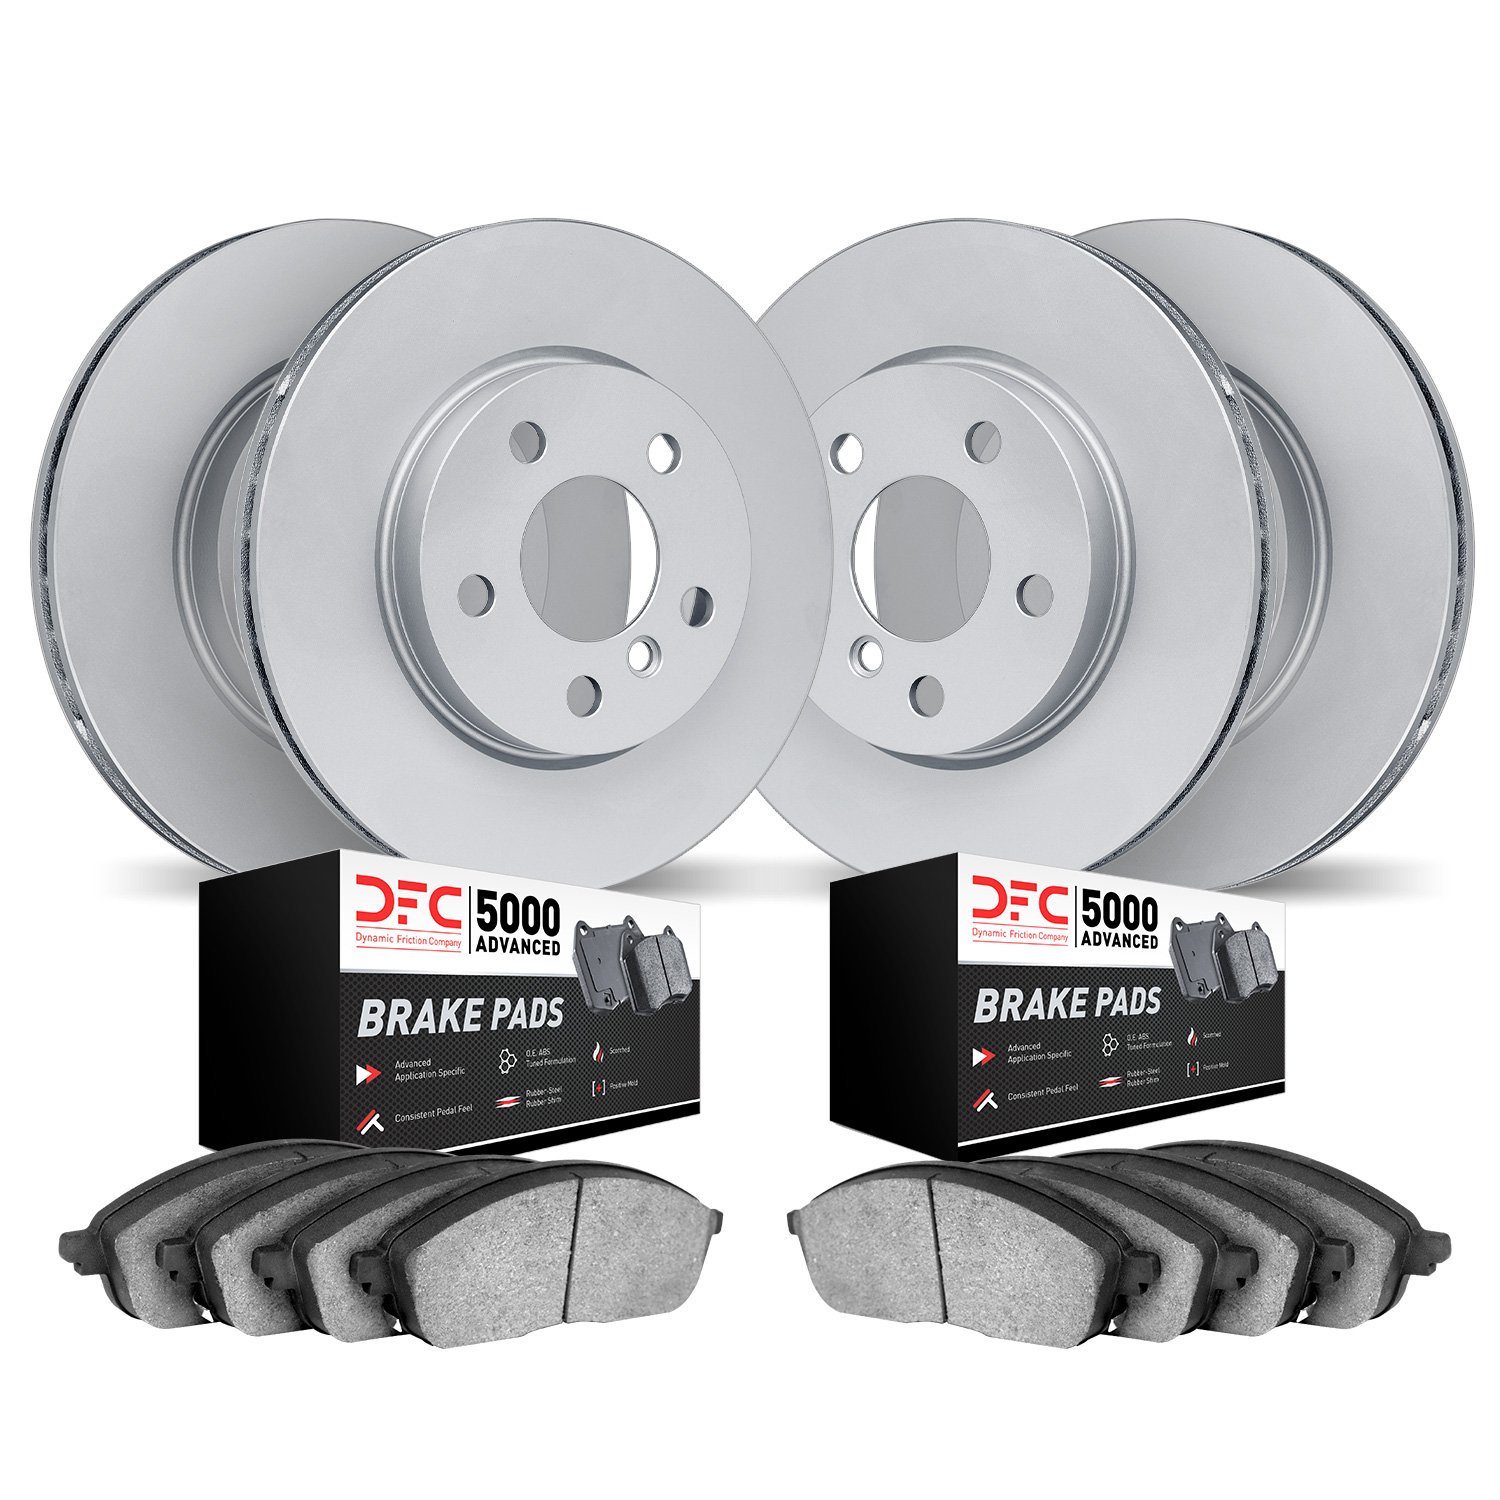 9504-63159 GEOMET Brake Rotors w/5000 Advanced Brake Pads Kit, 2017-2017 Mercedes-Benz, Position: Front and Rear